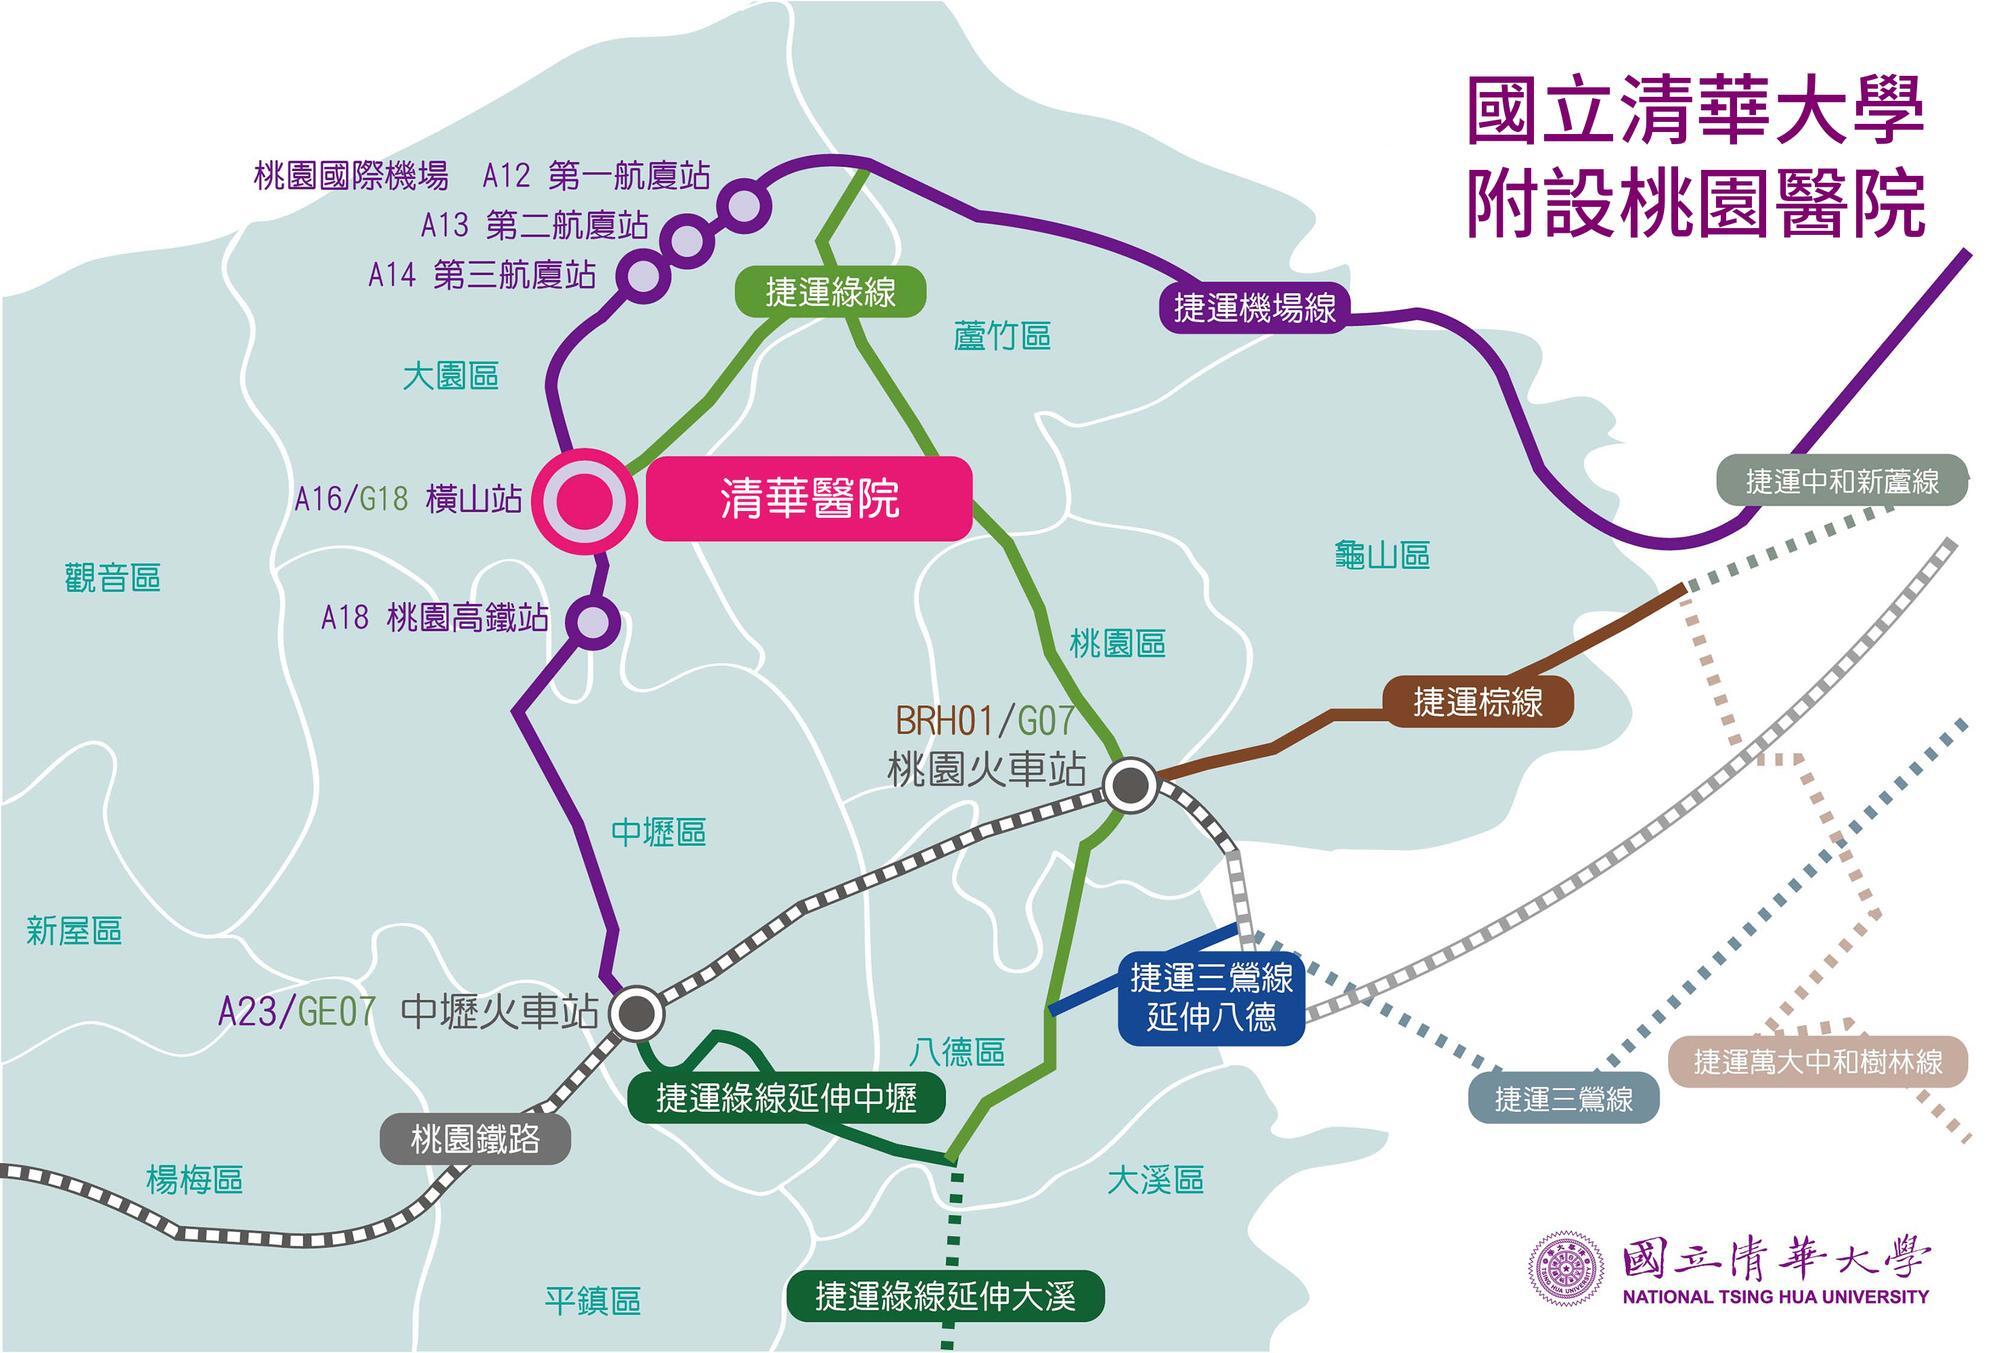 The NTHU Hospital will be adjacent to the A16 Hengshan Station of the Taoyuan Airport MRT. It is also expected to intersect with the future Green Line of the MRT. 